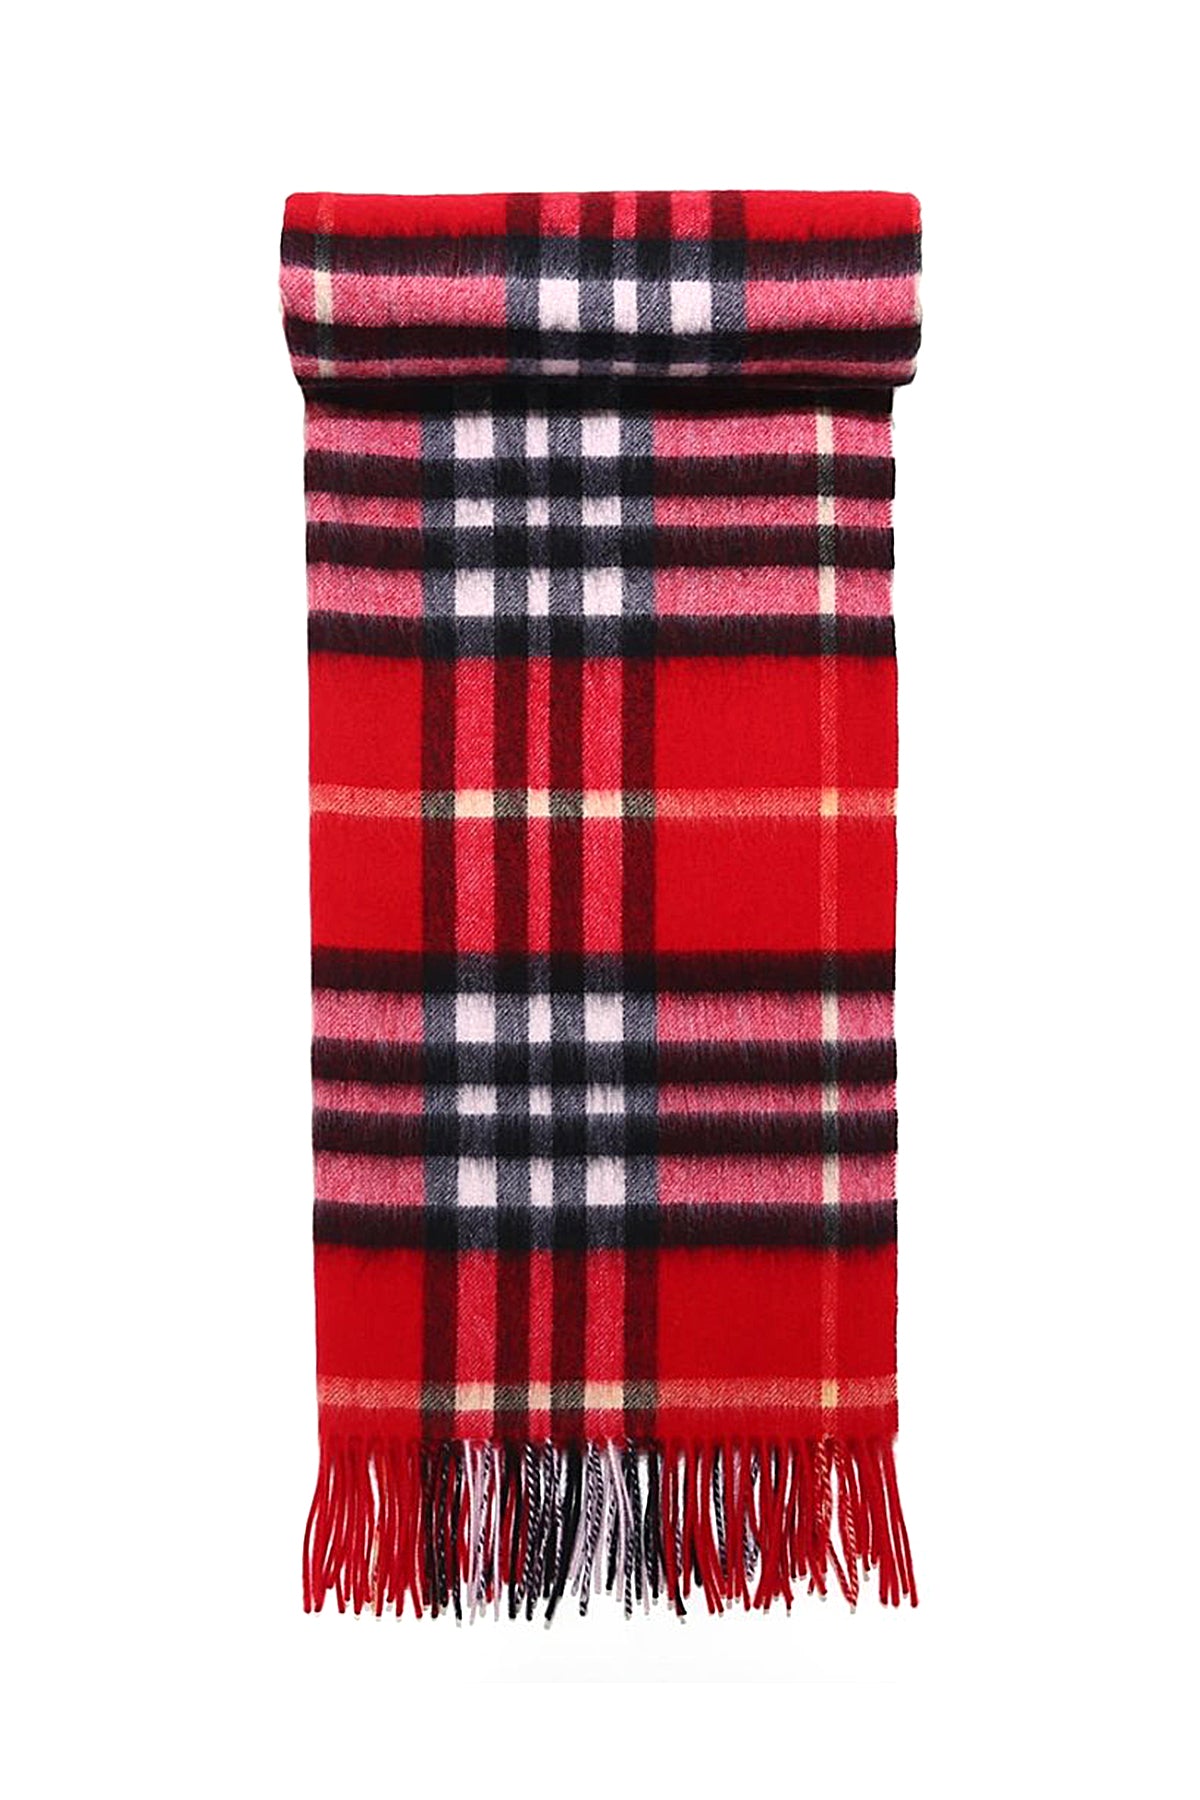 Cape DC Classic Red Poncho 100% Pure Lambswool